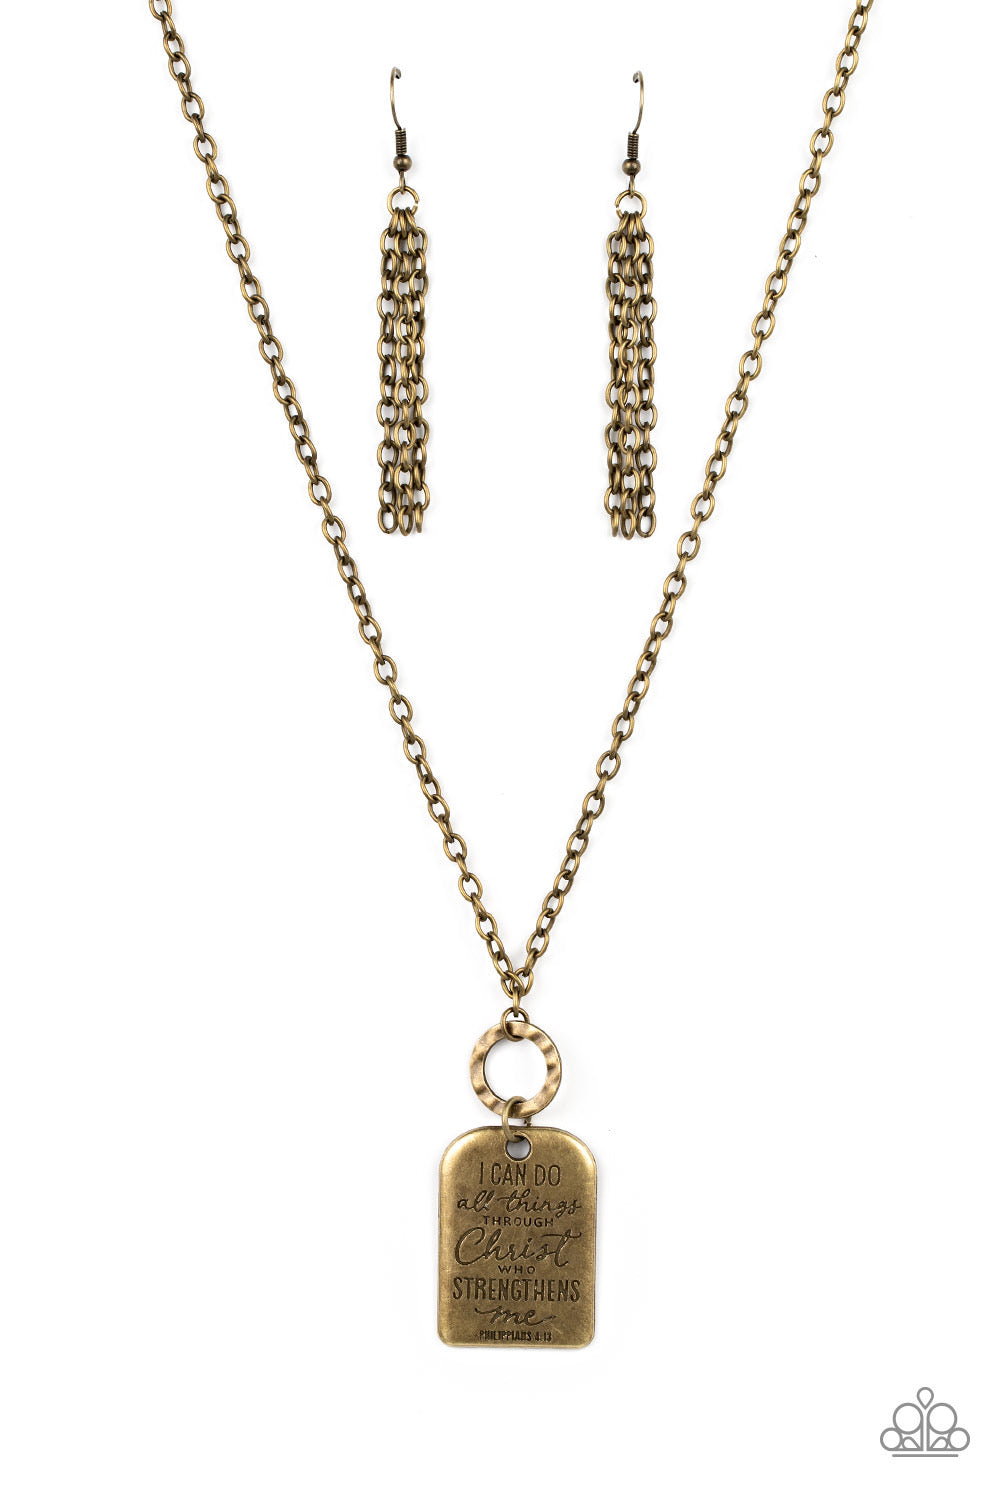 Paparazzi Persevering Philippians - Brass Necklace -Paparazzi Jewelry Images 